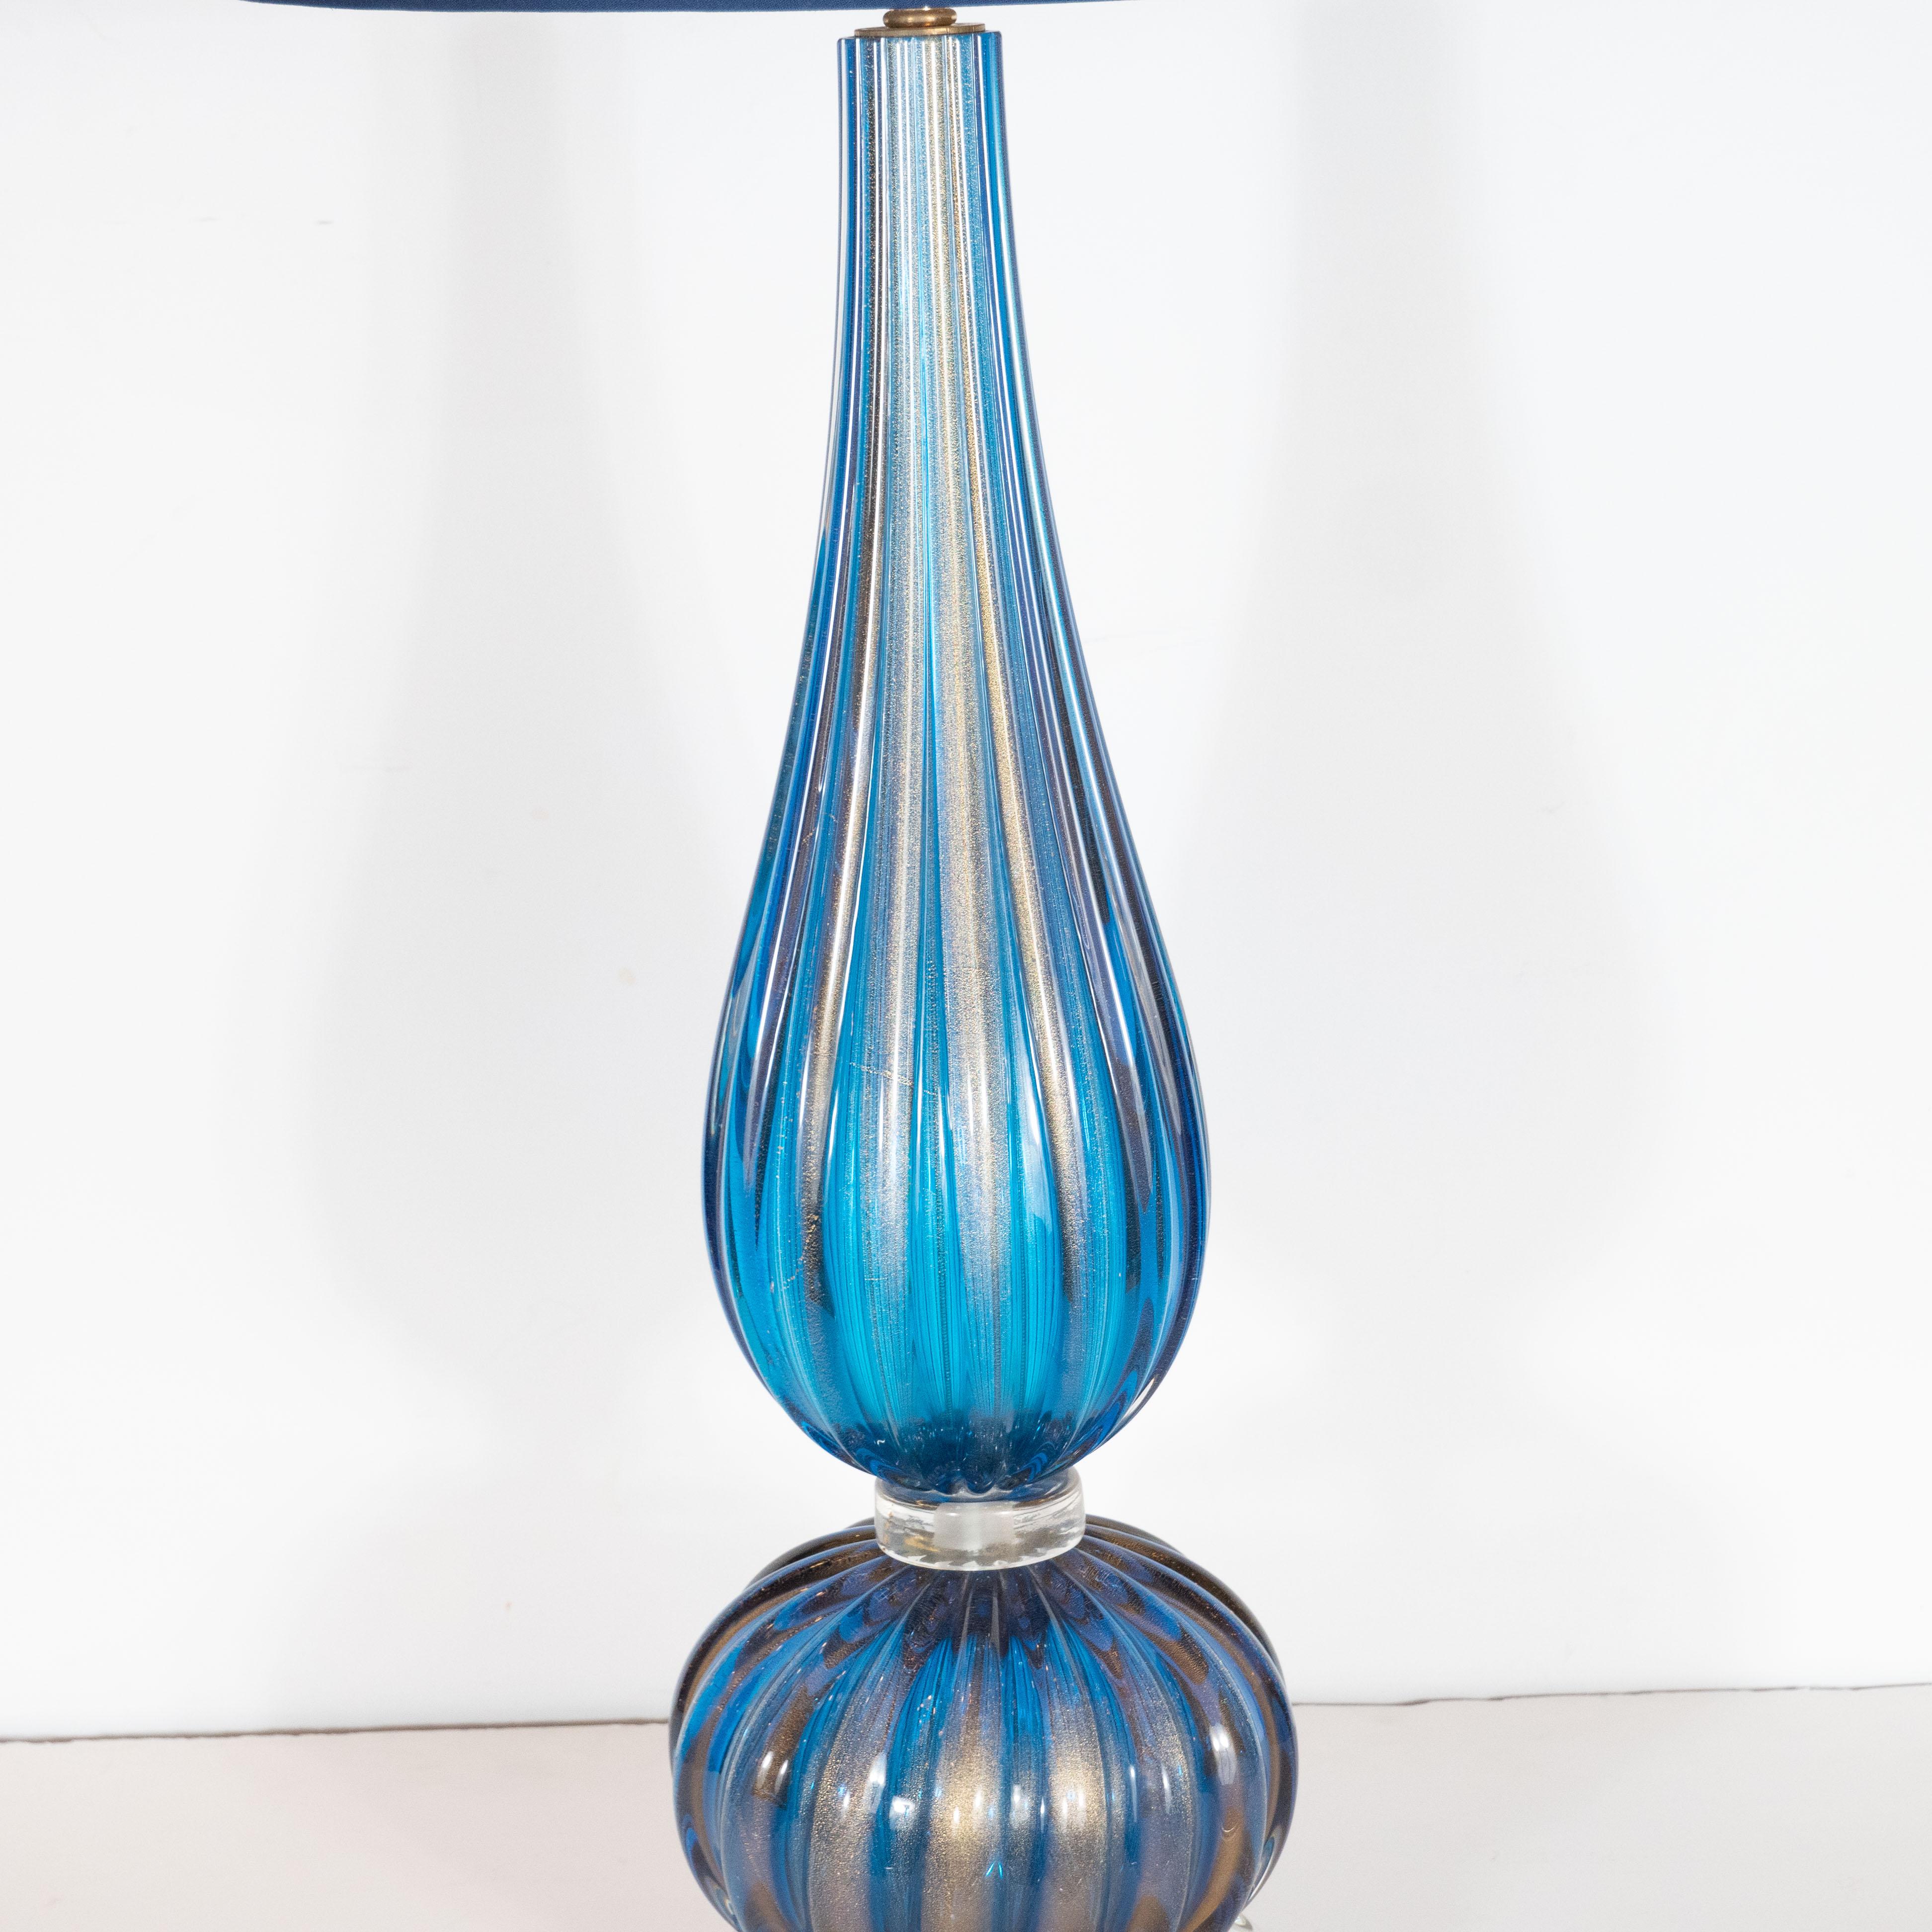 This stunning pair of table lamps were handblown in Murano, Italy- the island off the coast of Venice renowned for centuries for its superlative glass production. They feature tear drop form bodies in handblown reeded glass in a rich royal blue hue